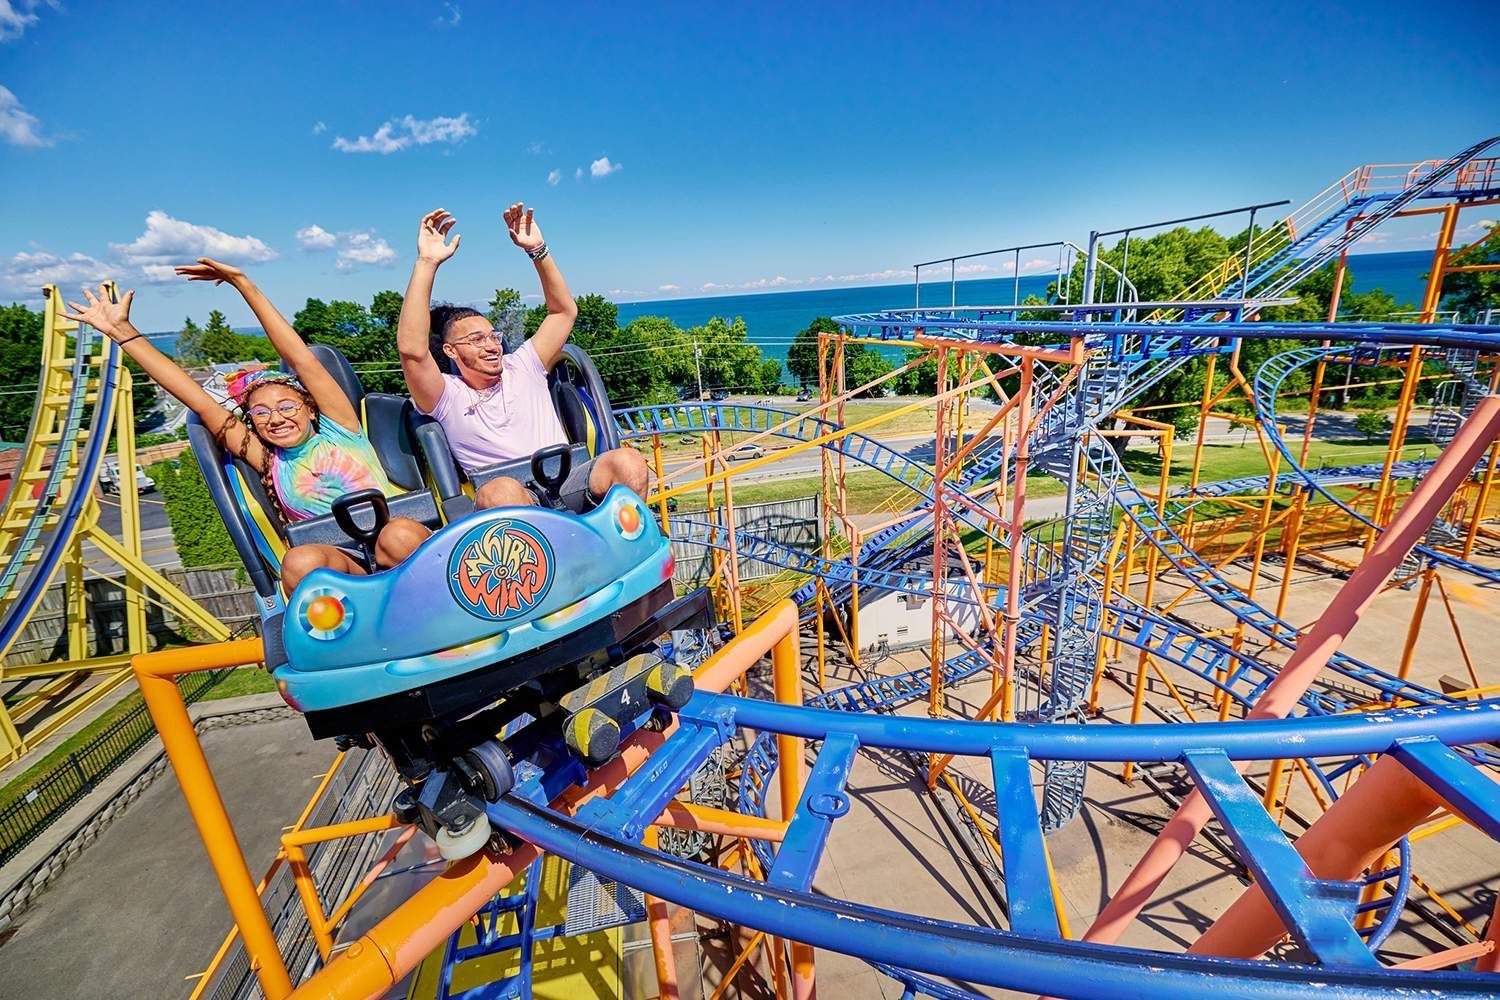 two people are riding a roller coaster at an amusement park .